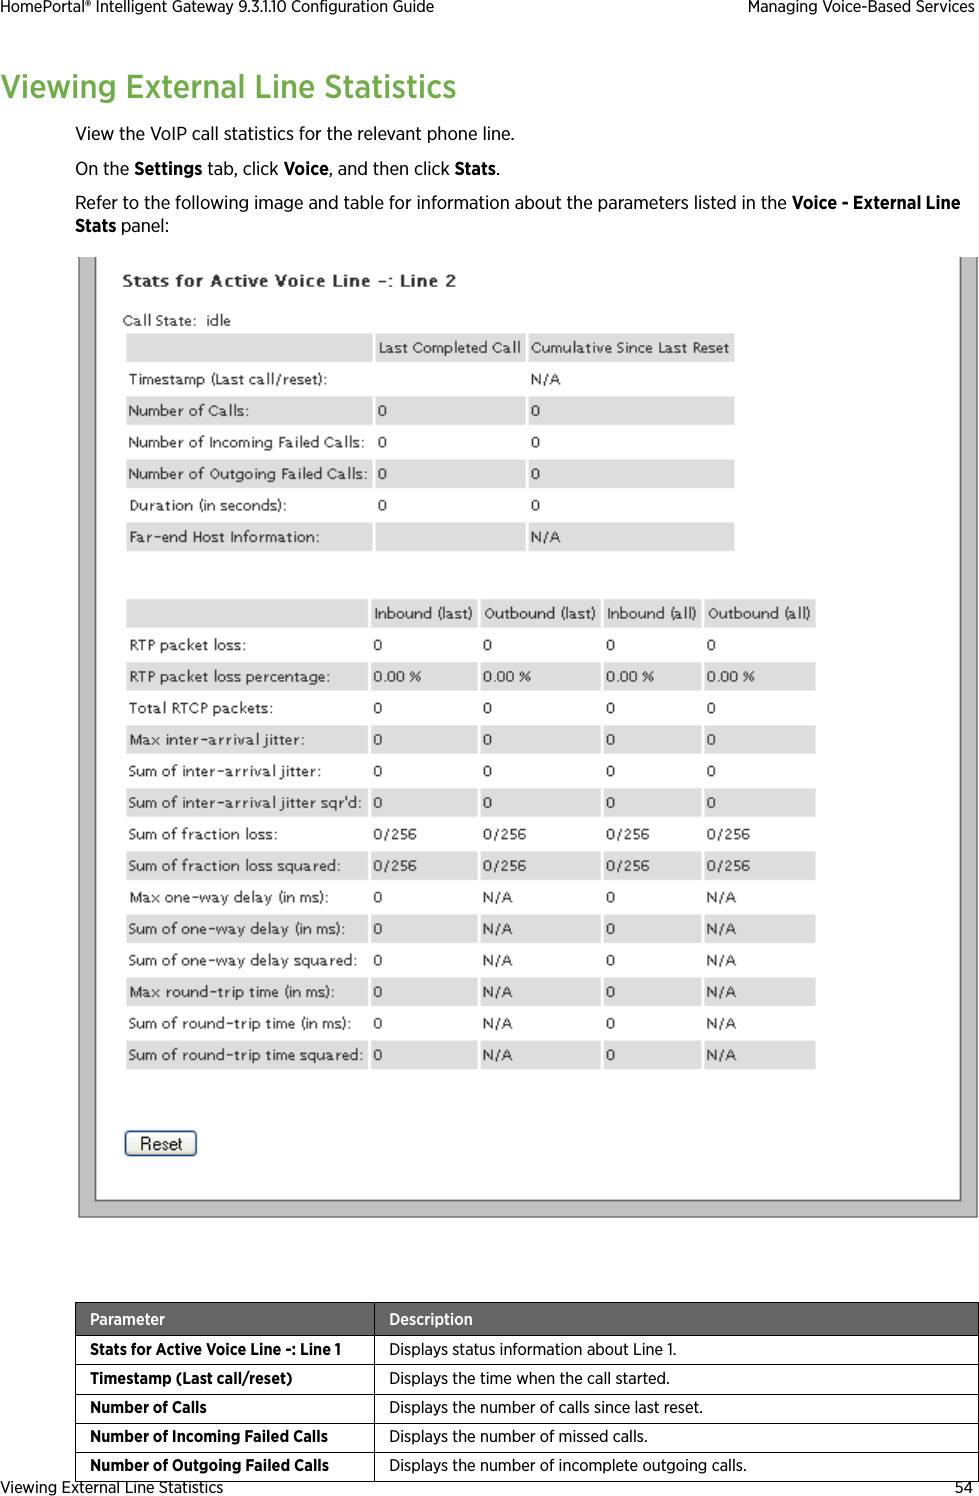 Viewing External Line Statistics 54HomePortal® Intelligent Gateway 9.3.1.10 Configuration Guide Managing Voice-Based ServicesViewing External Line StatisticsView the VoIP call statistics for the relevant phone line.On the Settings tab, click Voice, and then click Stats. Refer to the following image and table for information about the parameters listed in the Voice - External Line Stats panel:Parameter DescriptionStats for Active Voice Line -: Line 1 Displays status information about Line 1.Timestamp (Last call/reset) Displays the time when the call started.Number of Calls Displays the number of calls since last reset.Number of Incoming Failed Calls Displays the number of missed calls.Number of Outgoing Failed Calls Displays the number of incomplete outgoing calls.